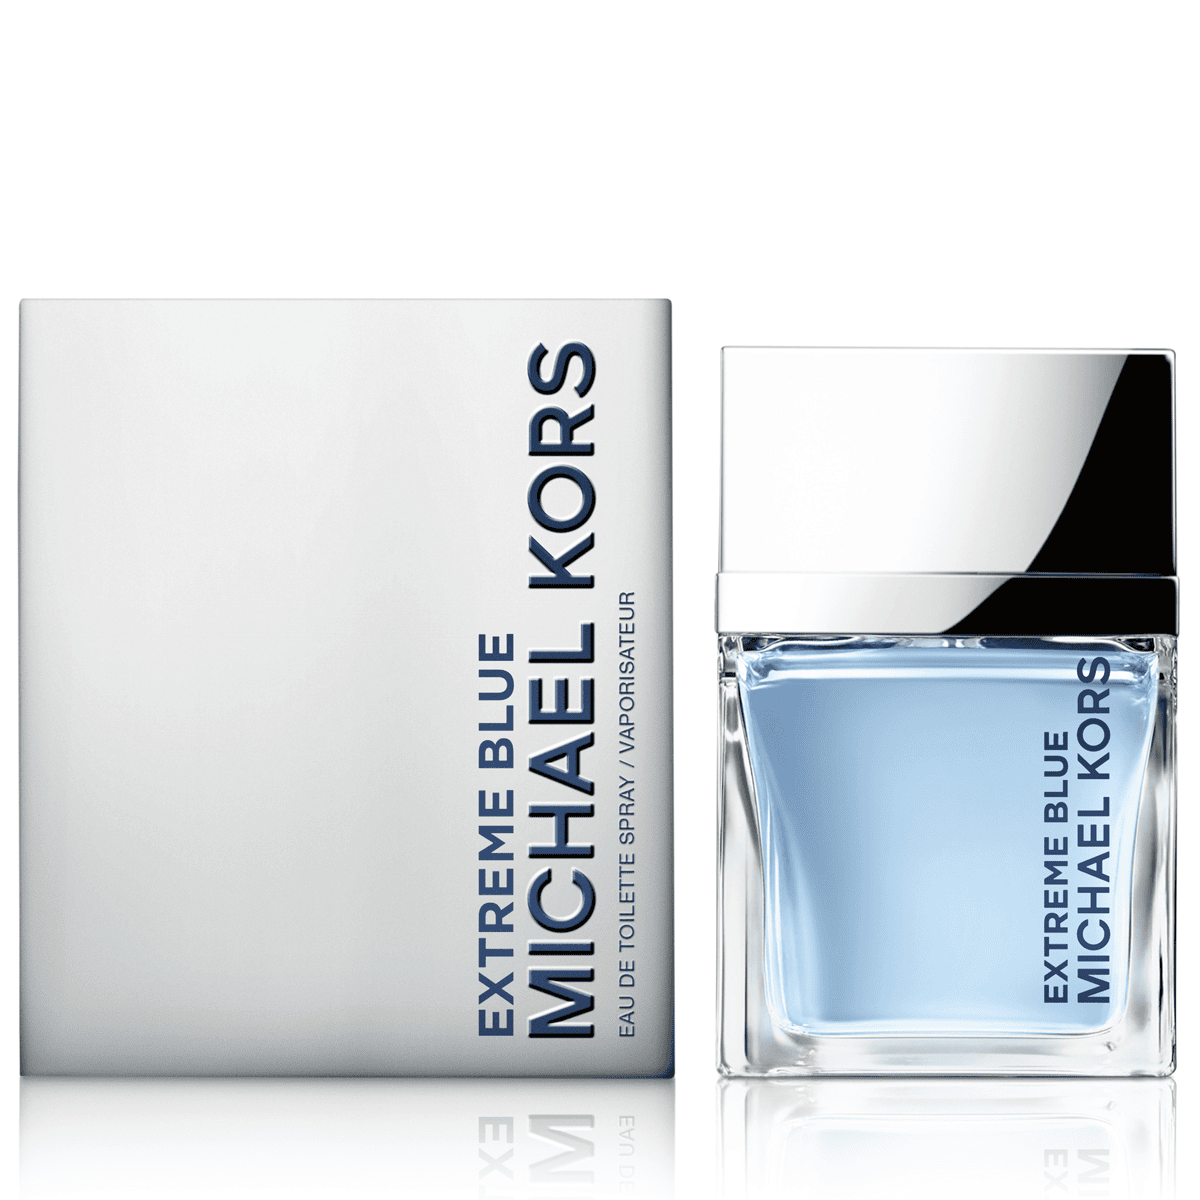 Michael Kors Extreme Journey Cologne by Michael Kors